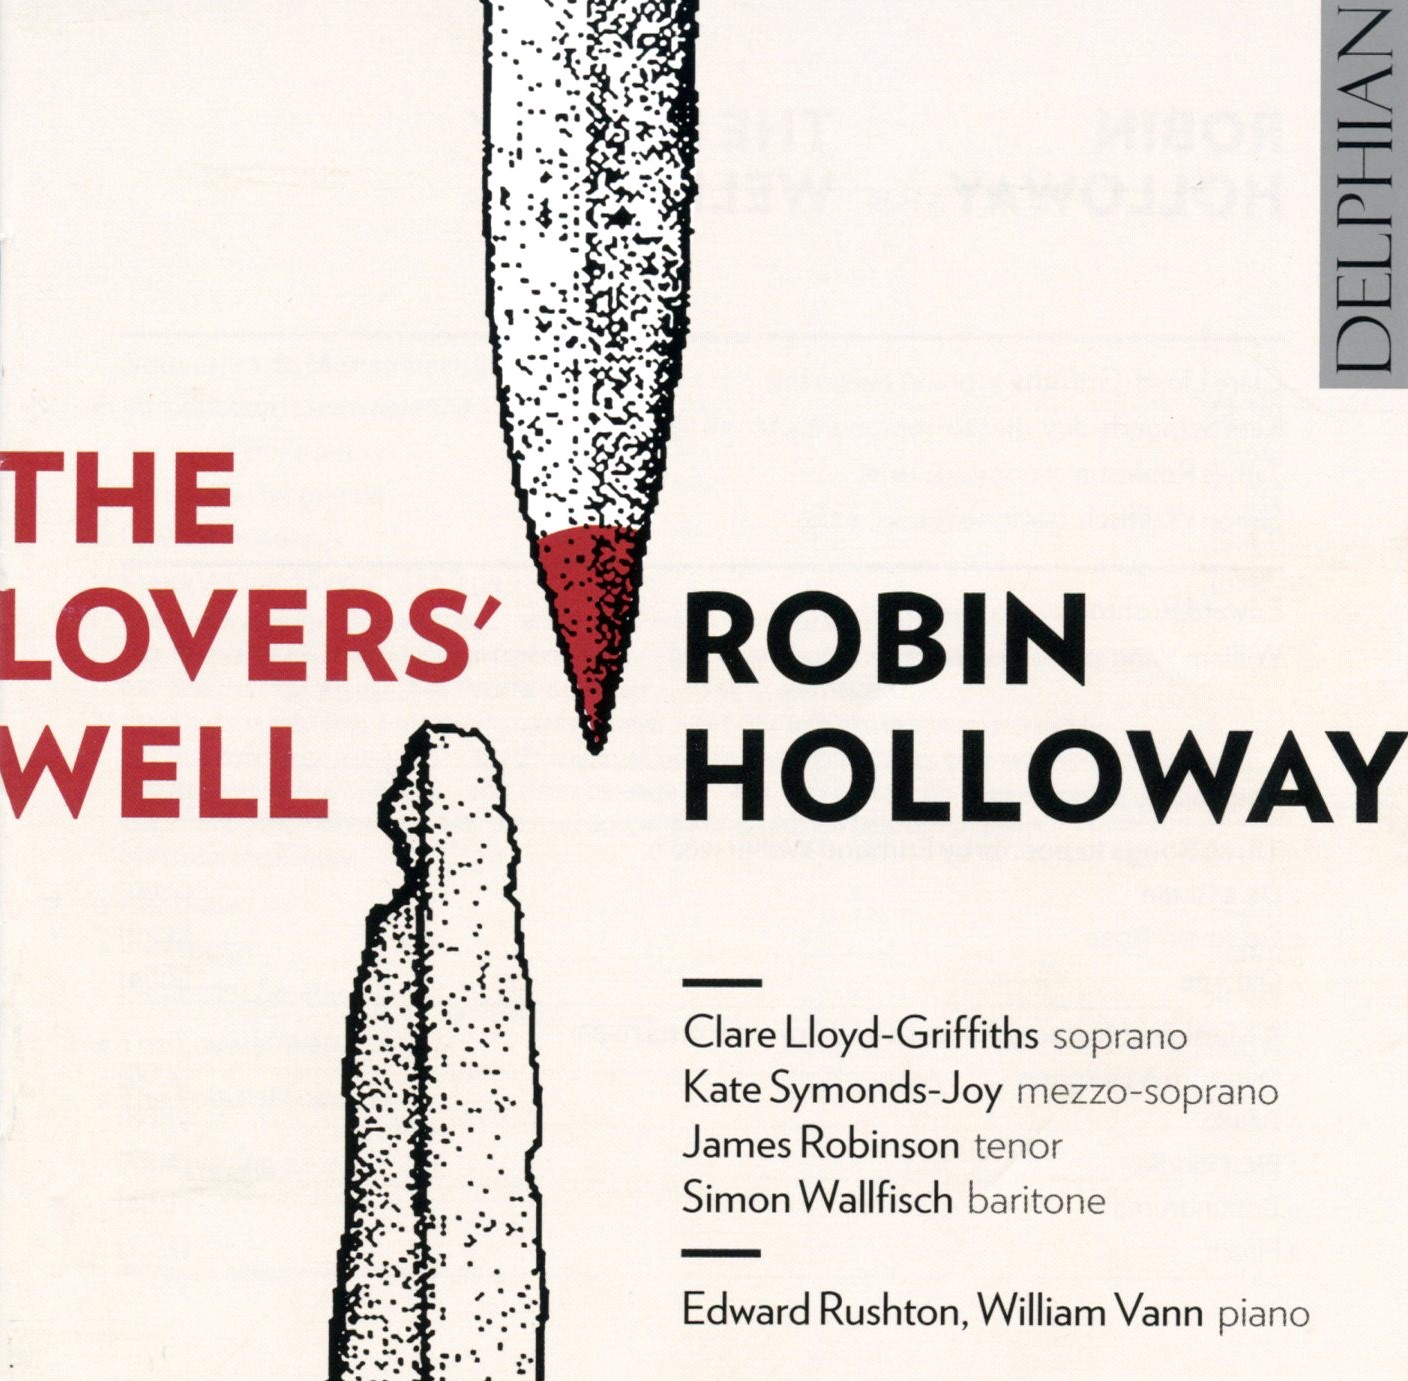 The Lovers' Well Robin Holloway CD image